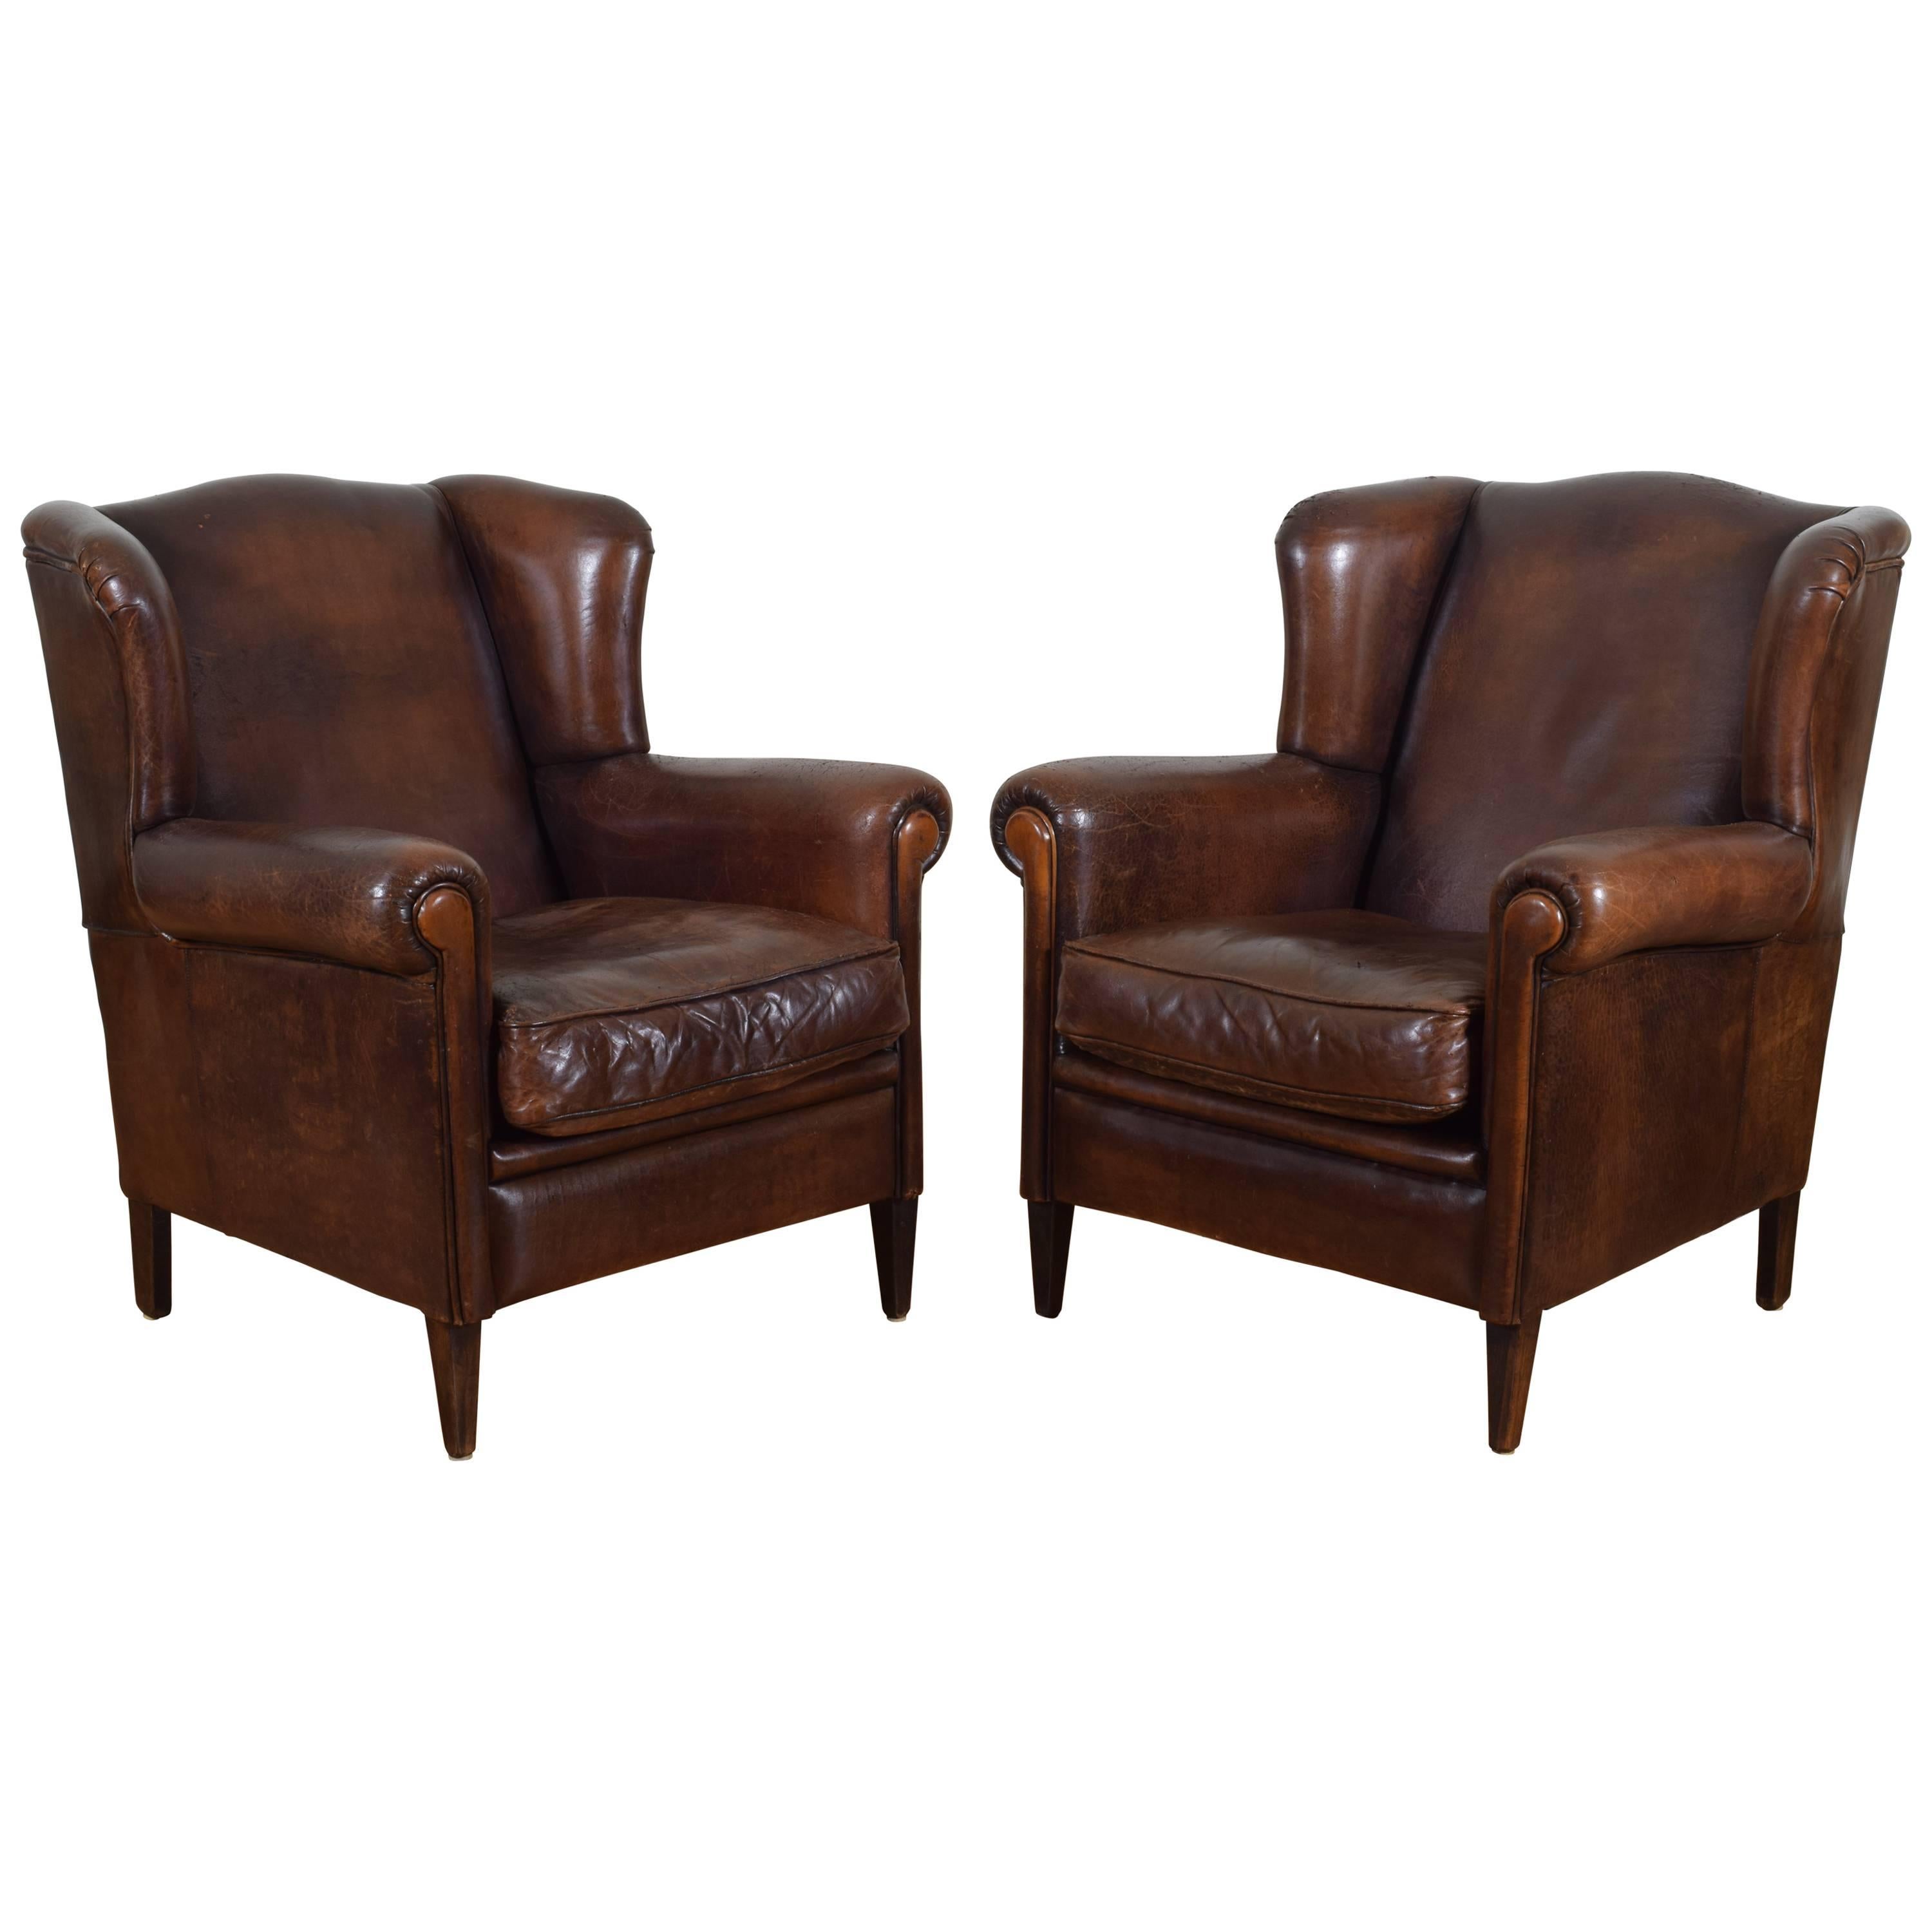 Pair of English Leather Upholstered Wingchairs with Piping, circa 1940s